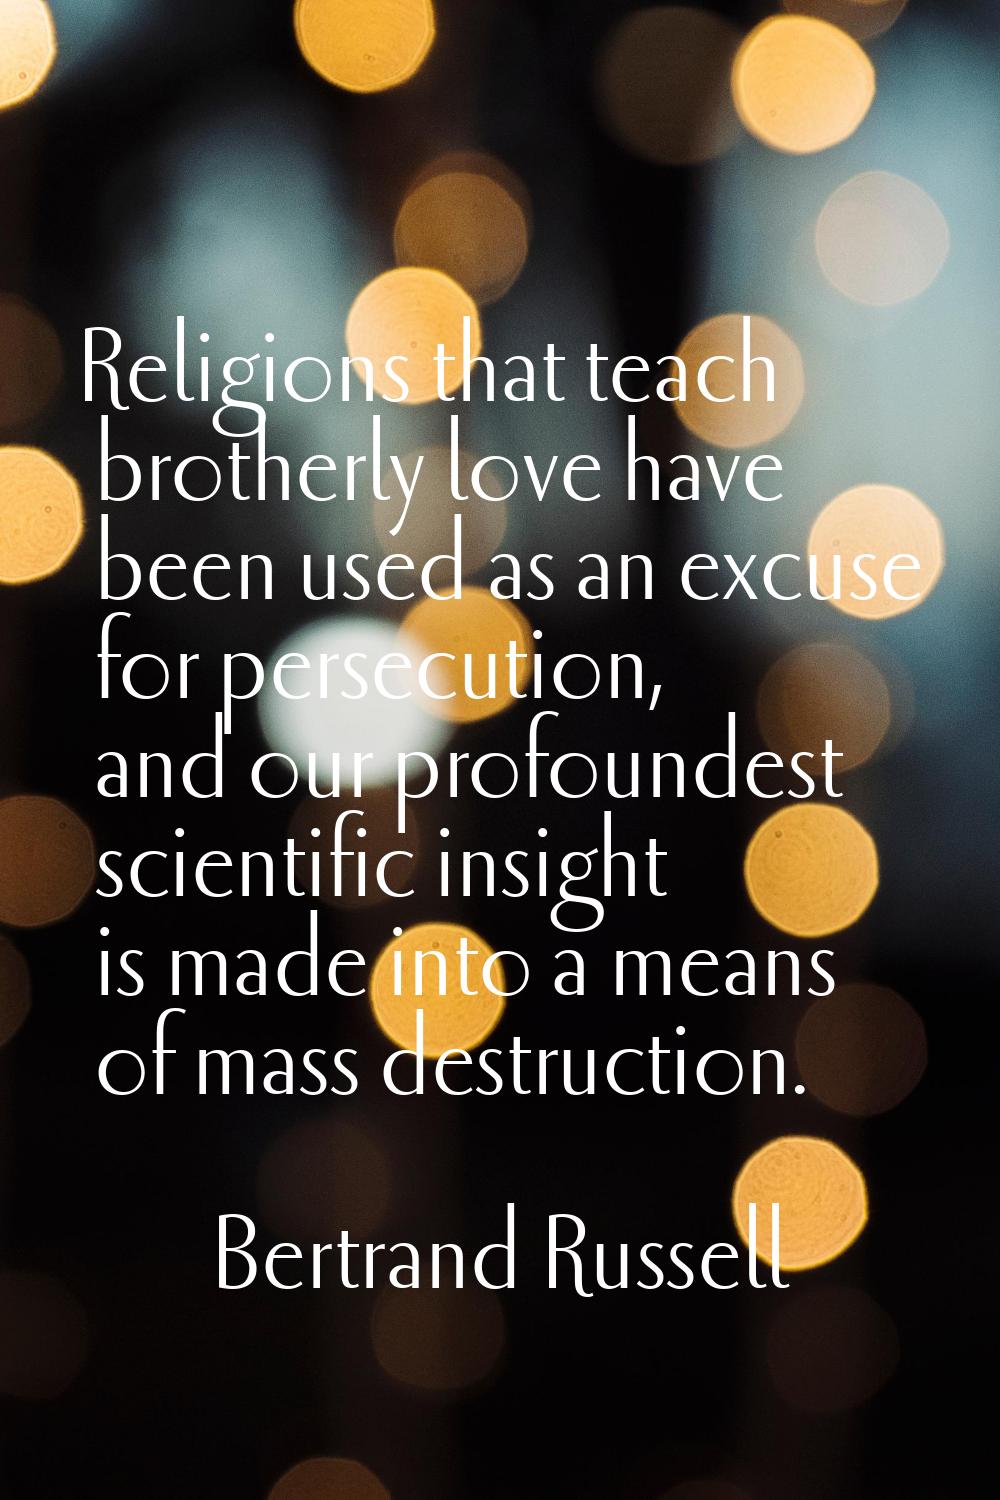 Religions that teach brotherly love have been used as an excuse for persecution, and our profoundes